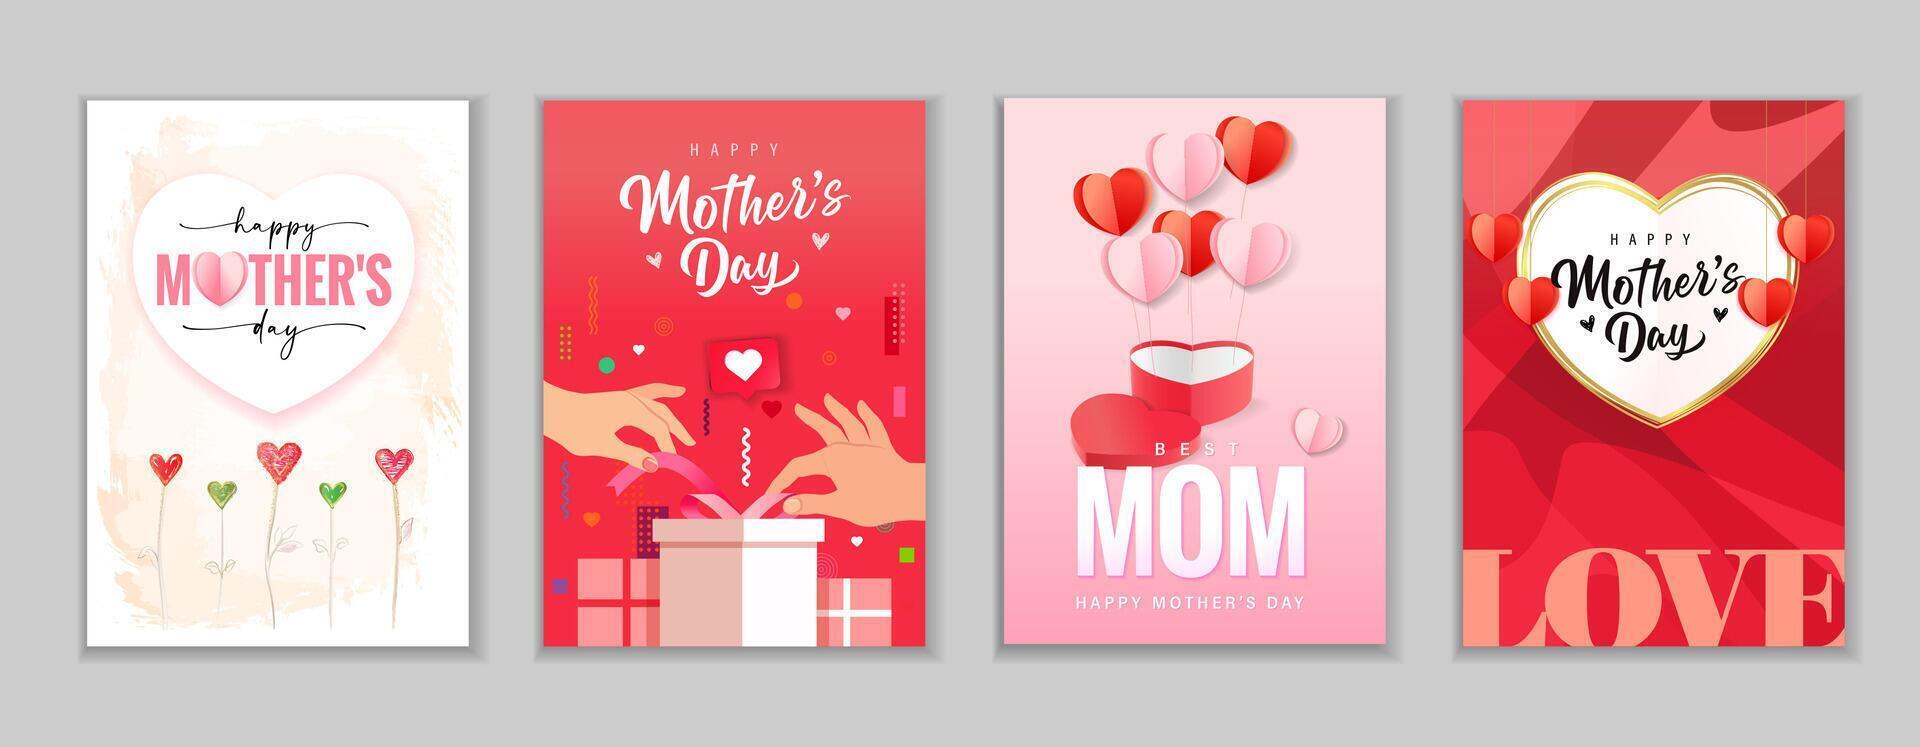 Happy Mother's Day greeting cards set. Cute graphic collection vector